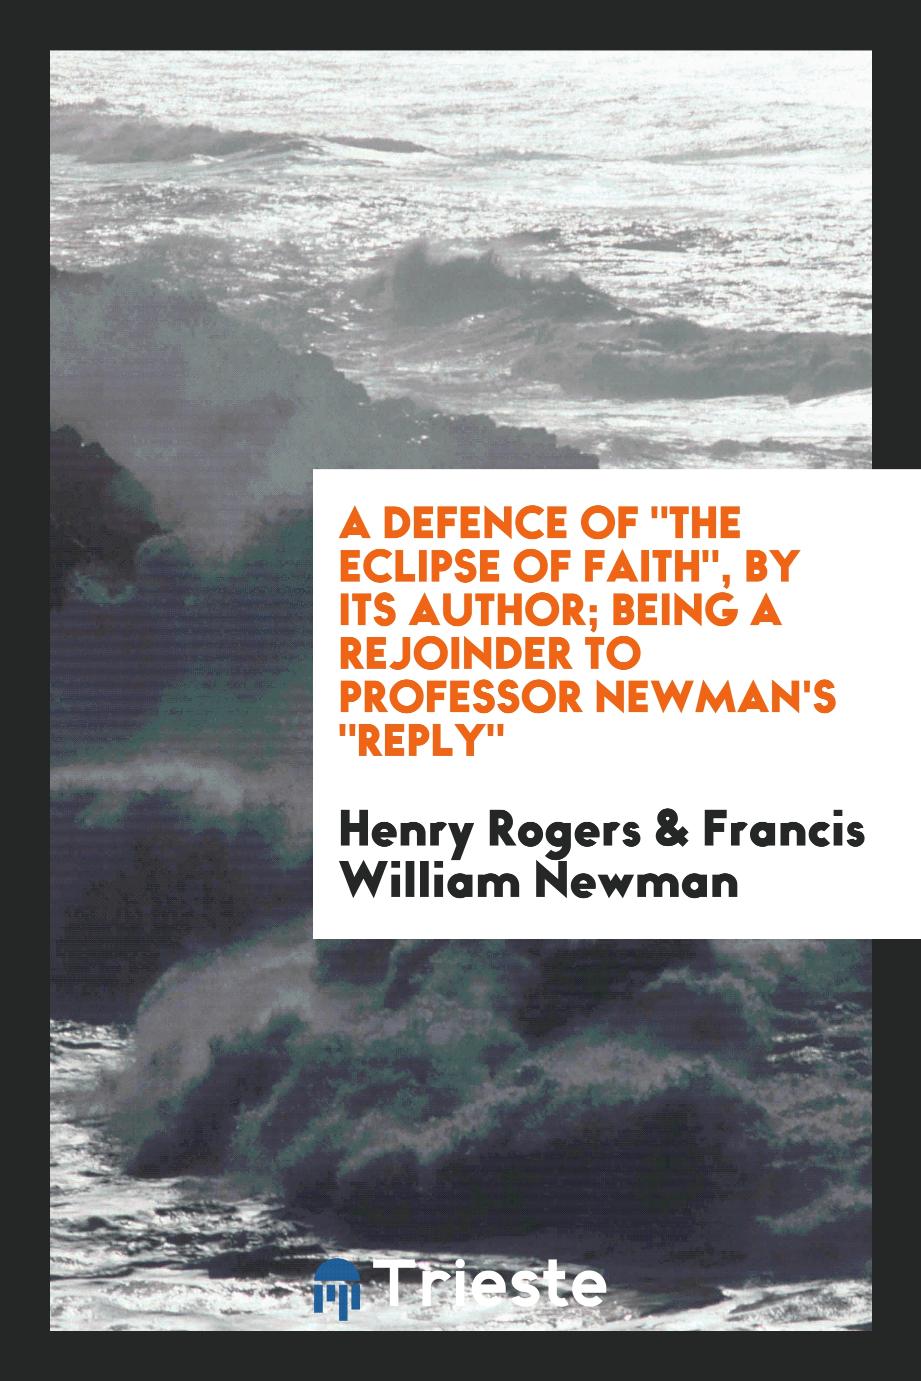 A Defence Of "The Eclipse of Faith", by Its Author; Being a Rejoinder to Professor Newman's "Reply"